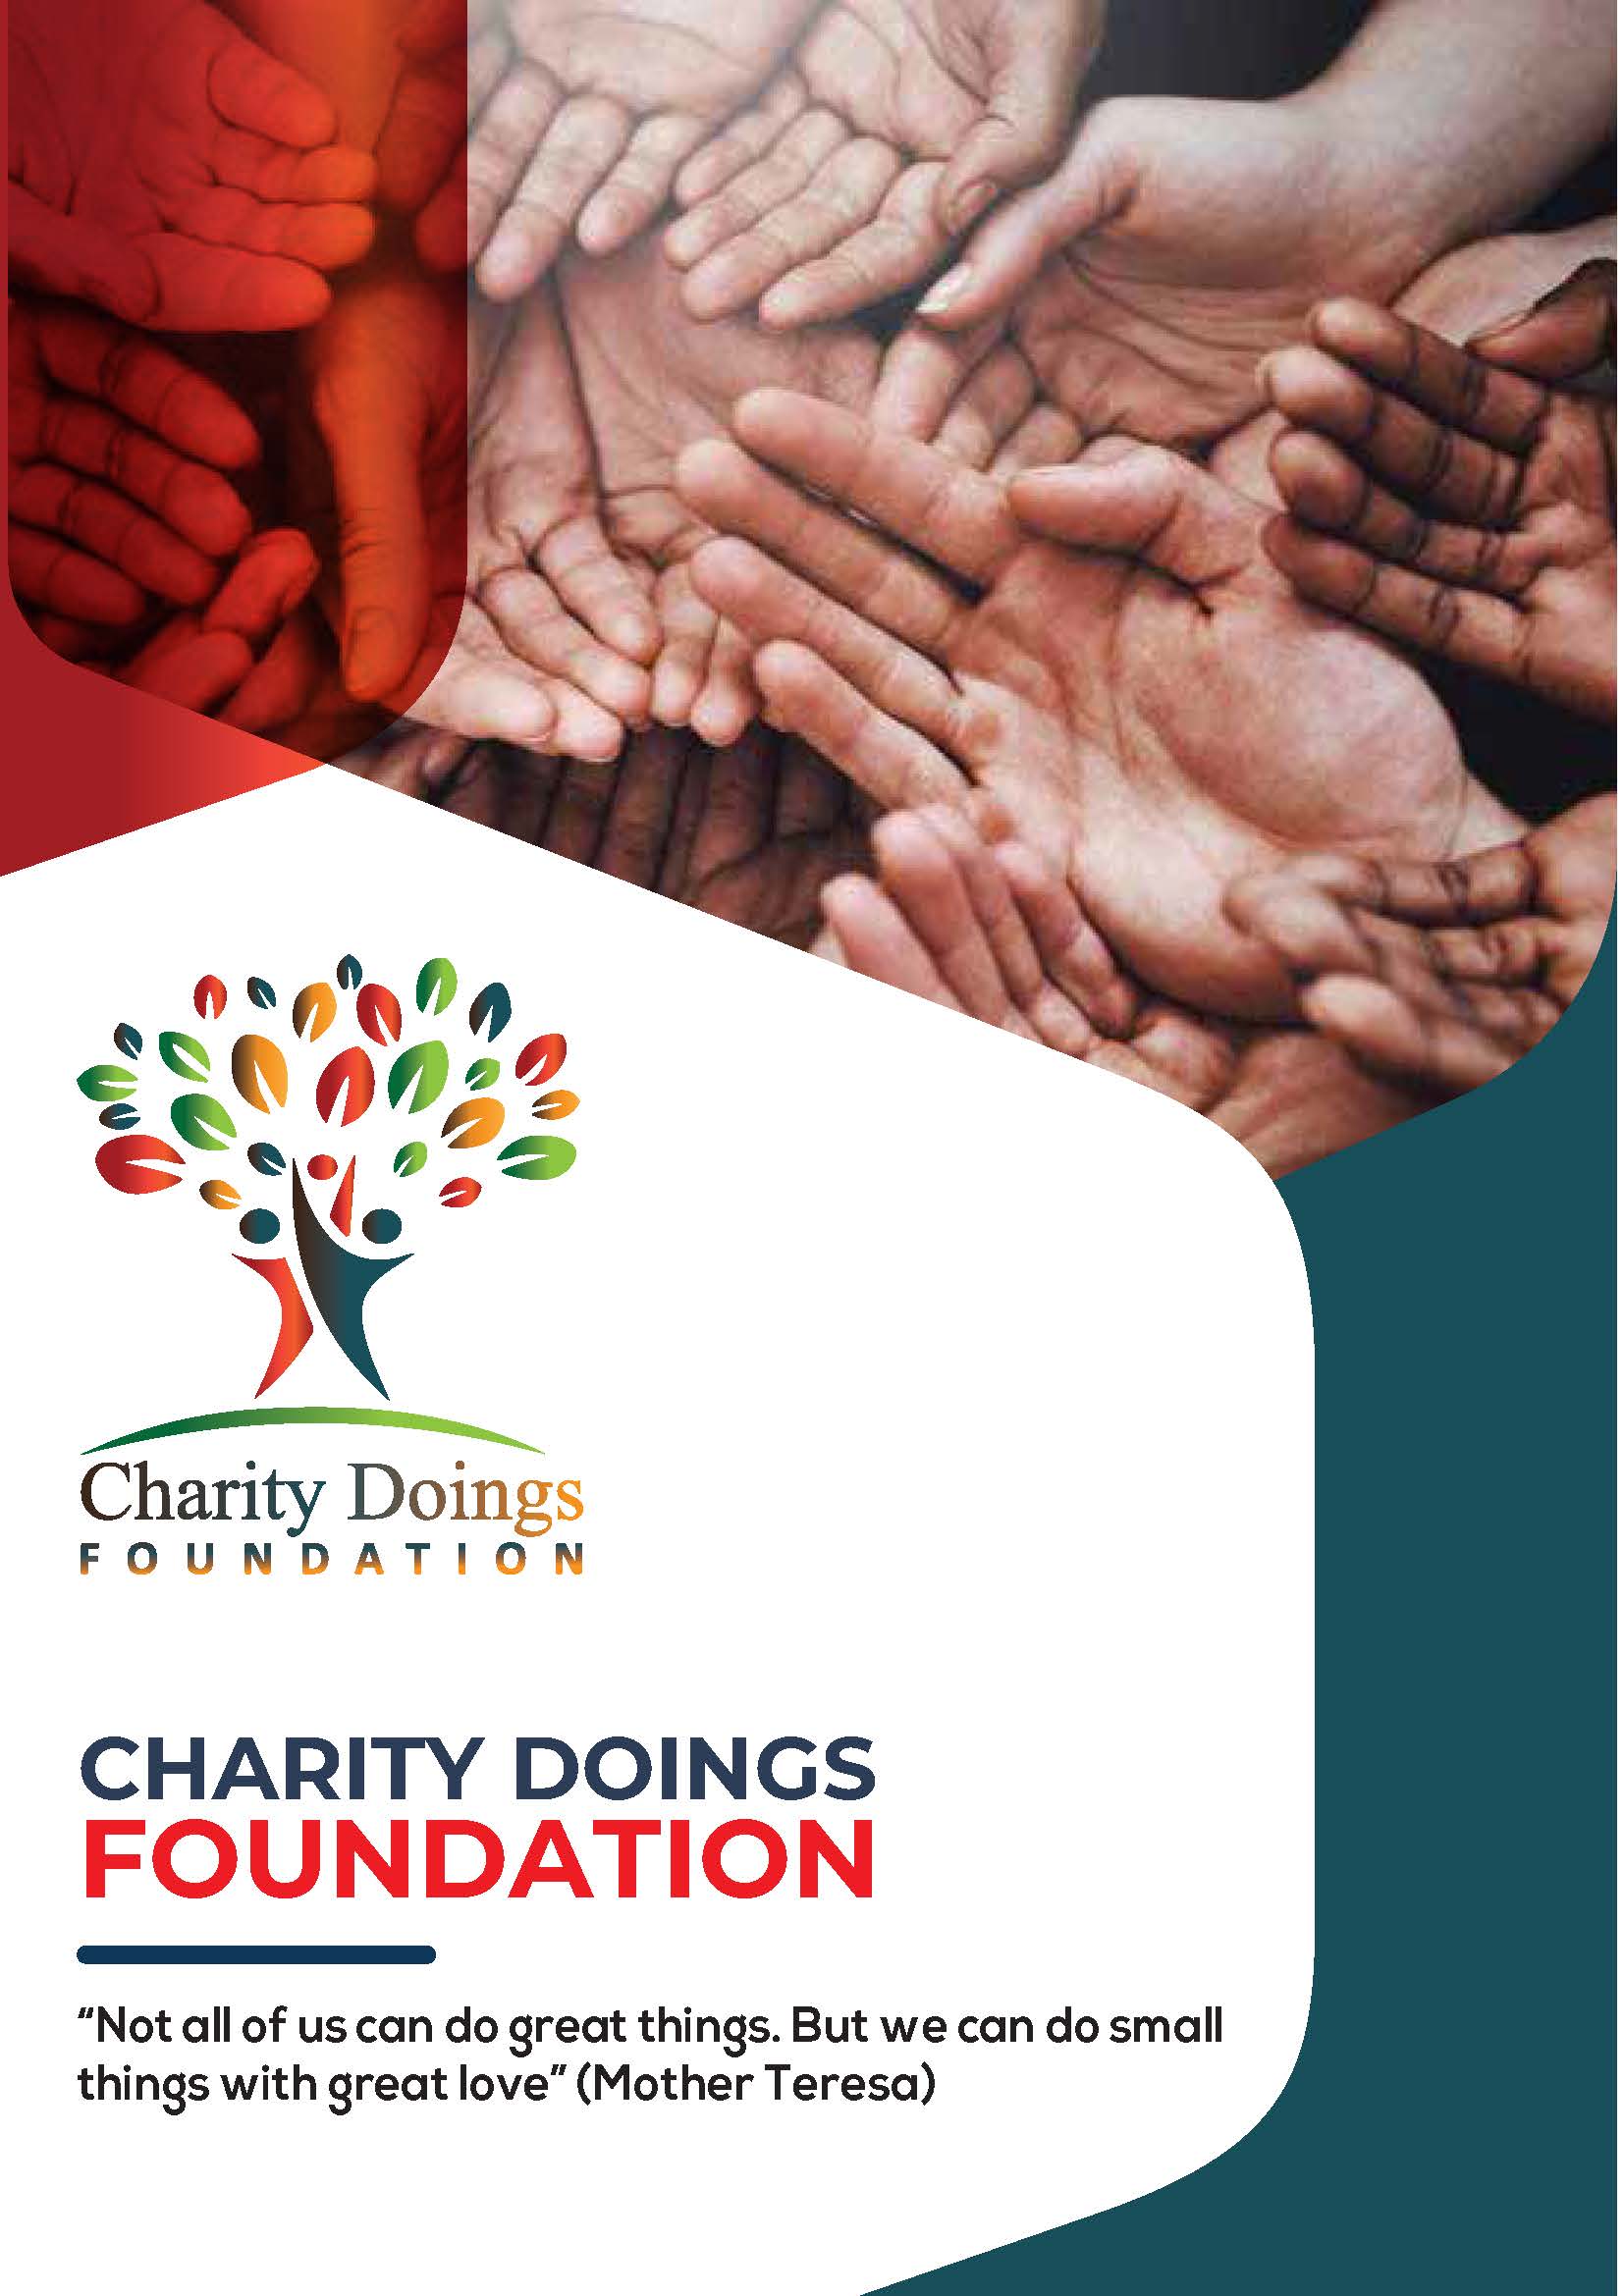 Profile and portfolio of charity doings foundation